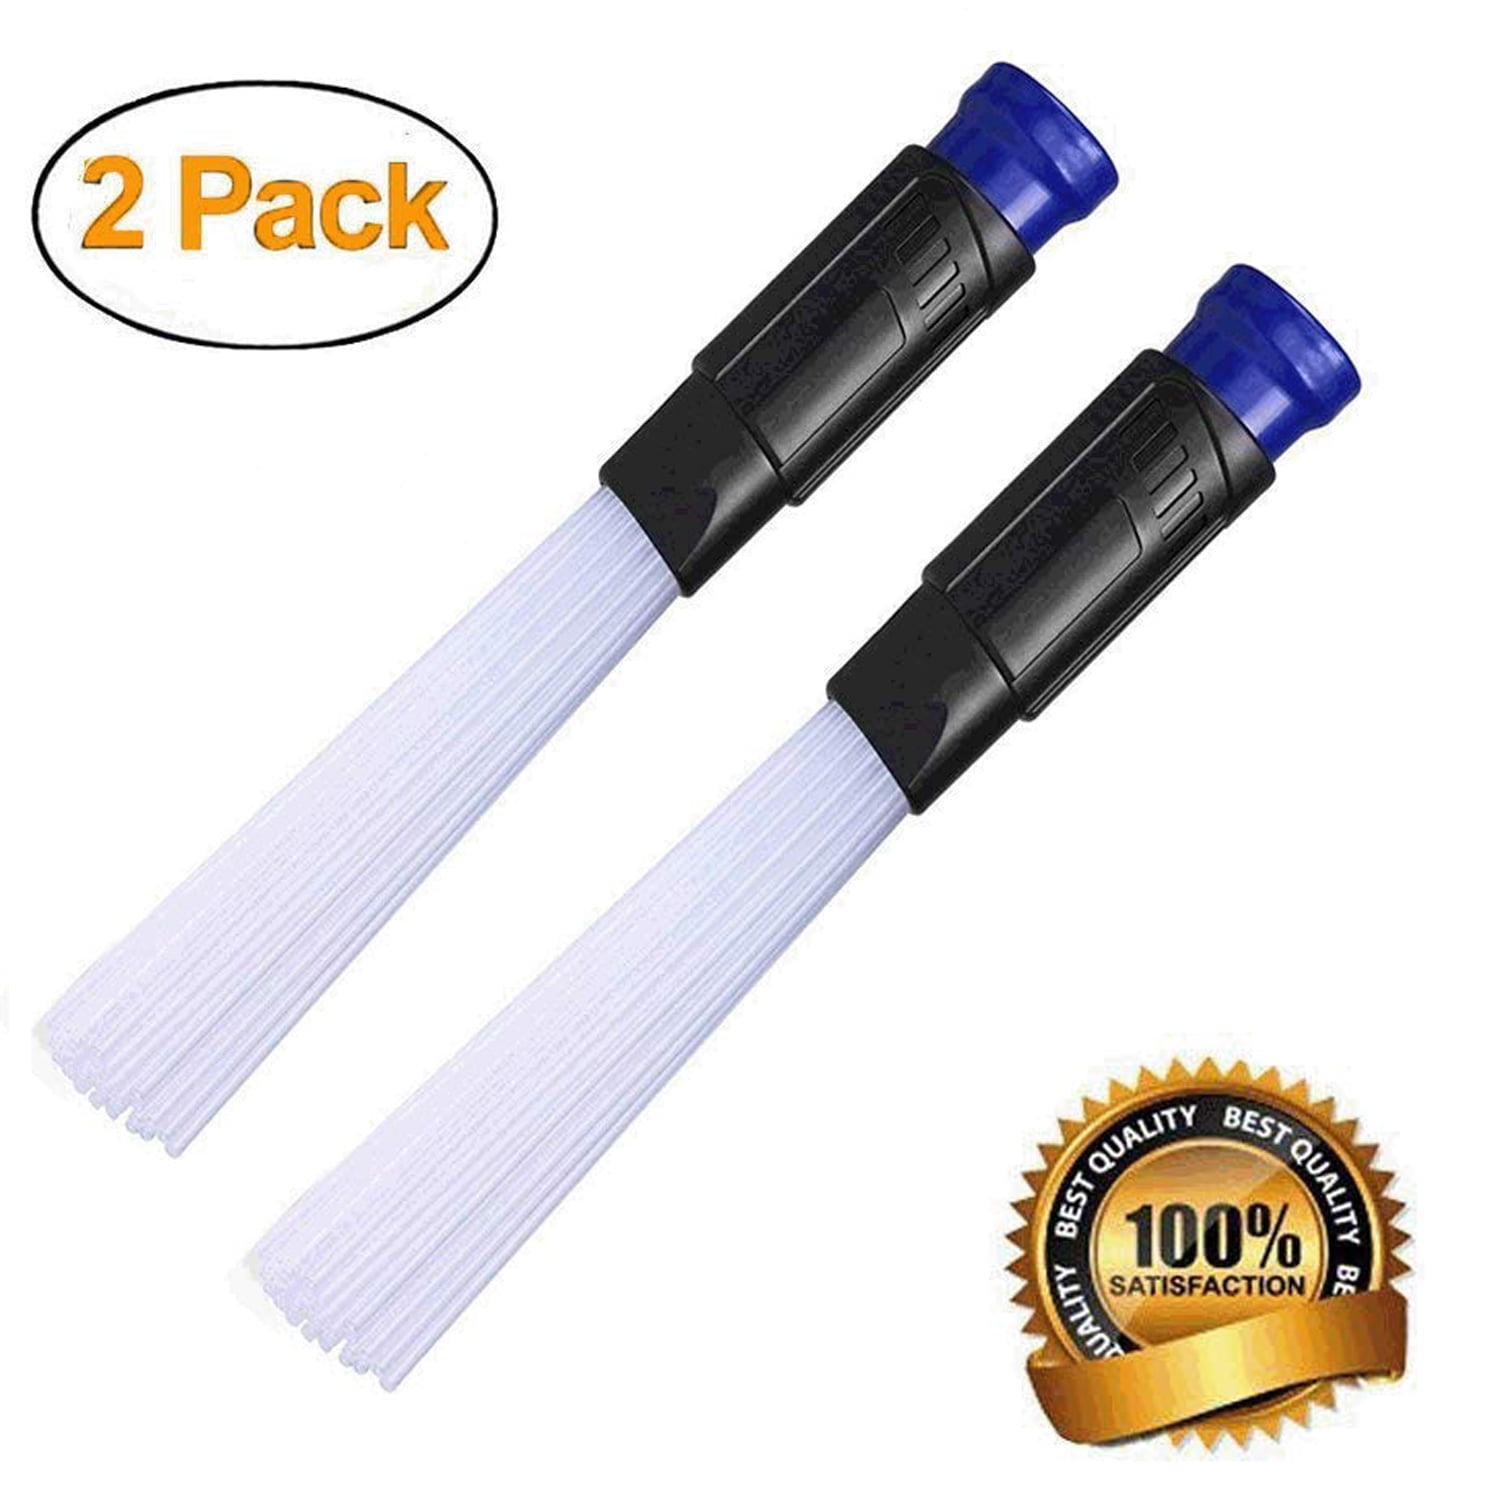 Dust Brush Cleaner Dust Dirt Remover Tool Dusty Brush Dust Cleaning Great for Car/Pets/Keyboards/Air Vent/Drawers Dust Daily Universal Vacuum Attachment Tool Tiny Tubes Cleaner Dirt Sweeper 